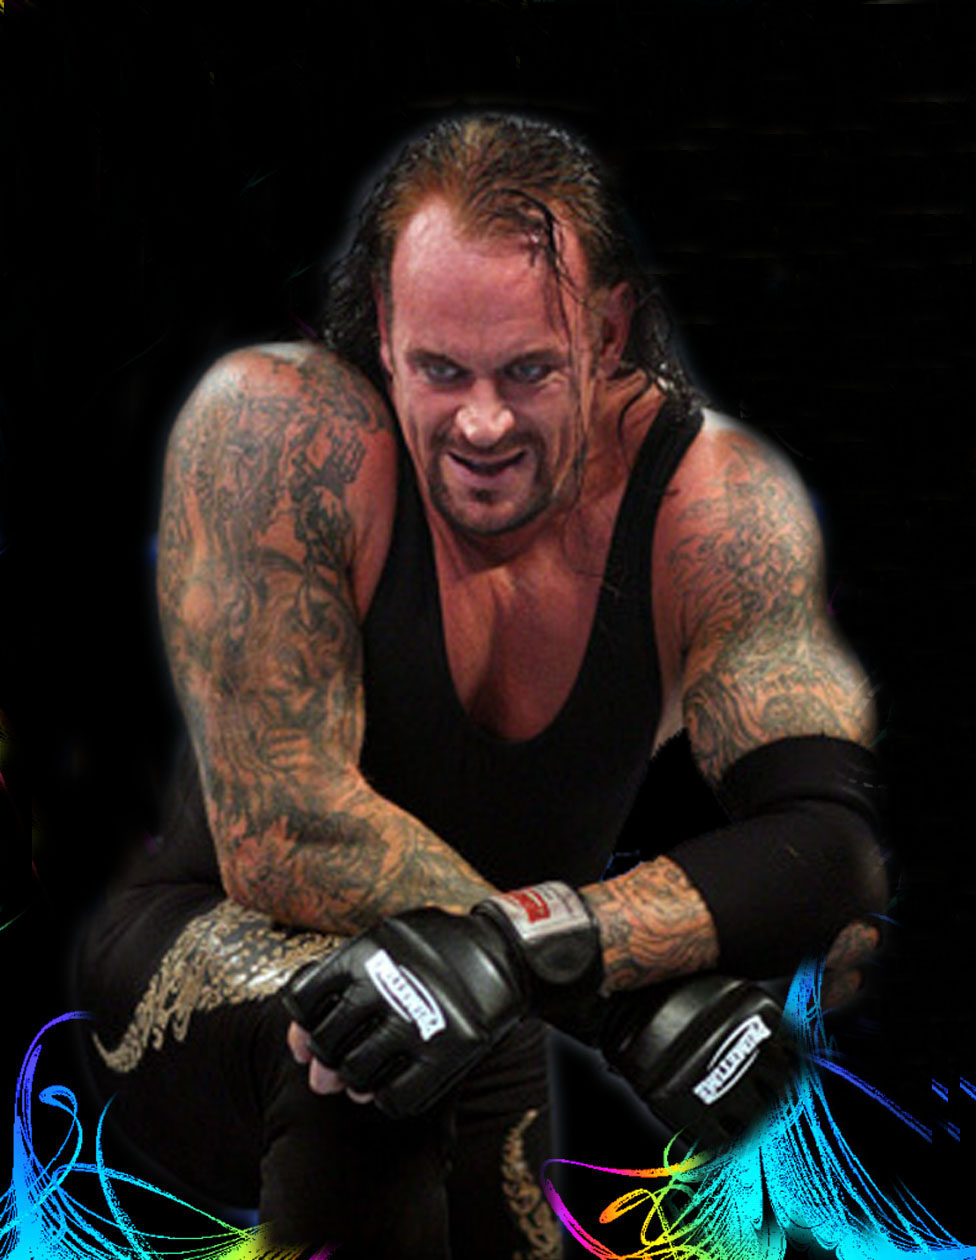 (born March 24, 1965),better known by his ring name The Undertaker (sometim...